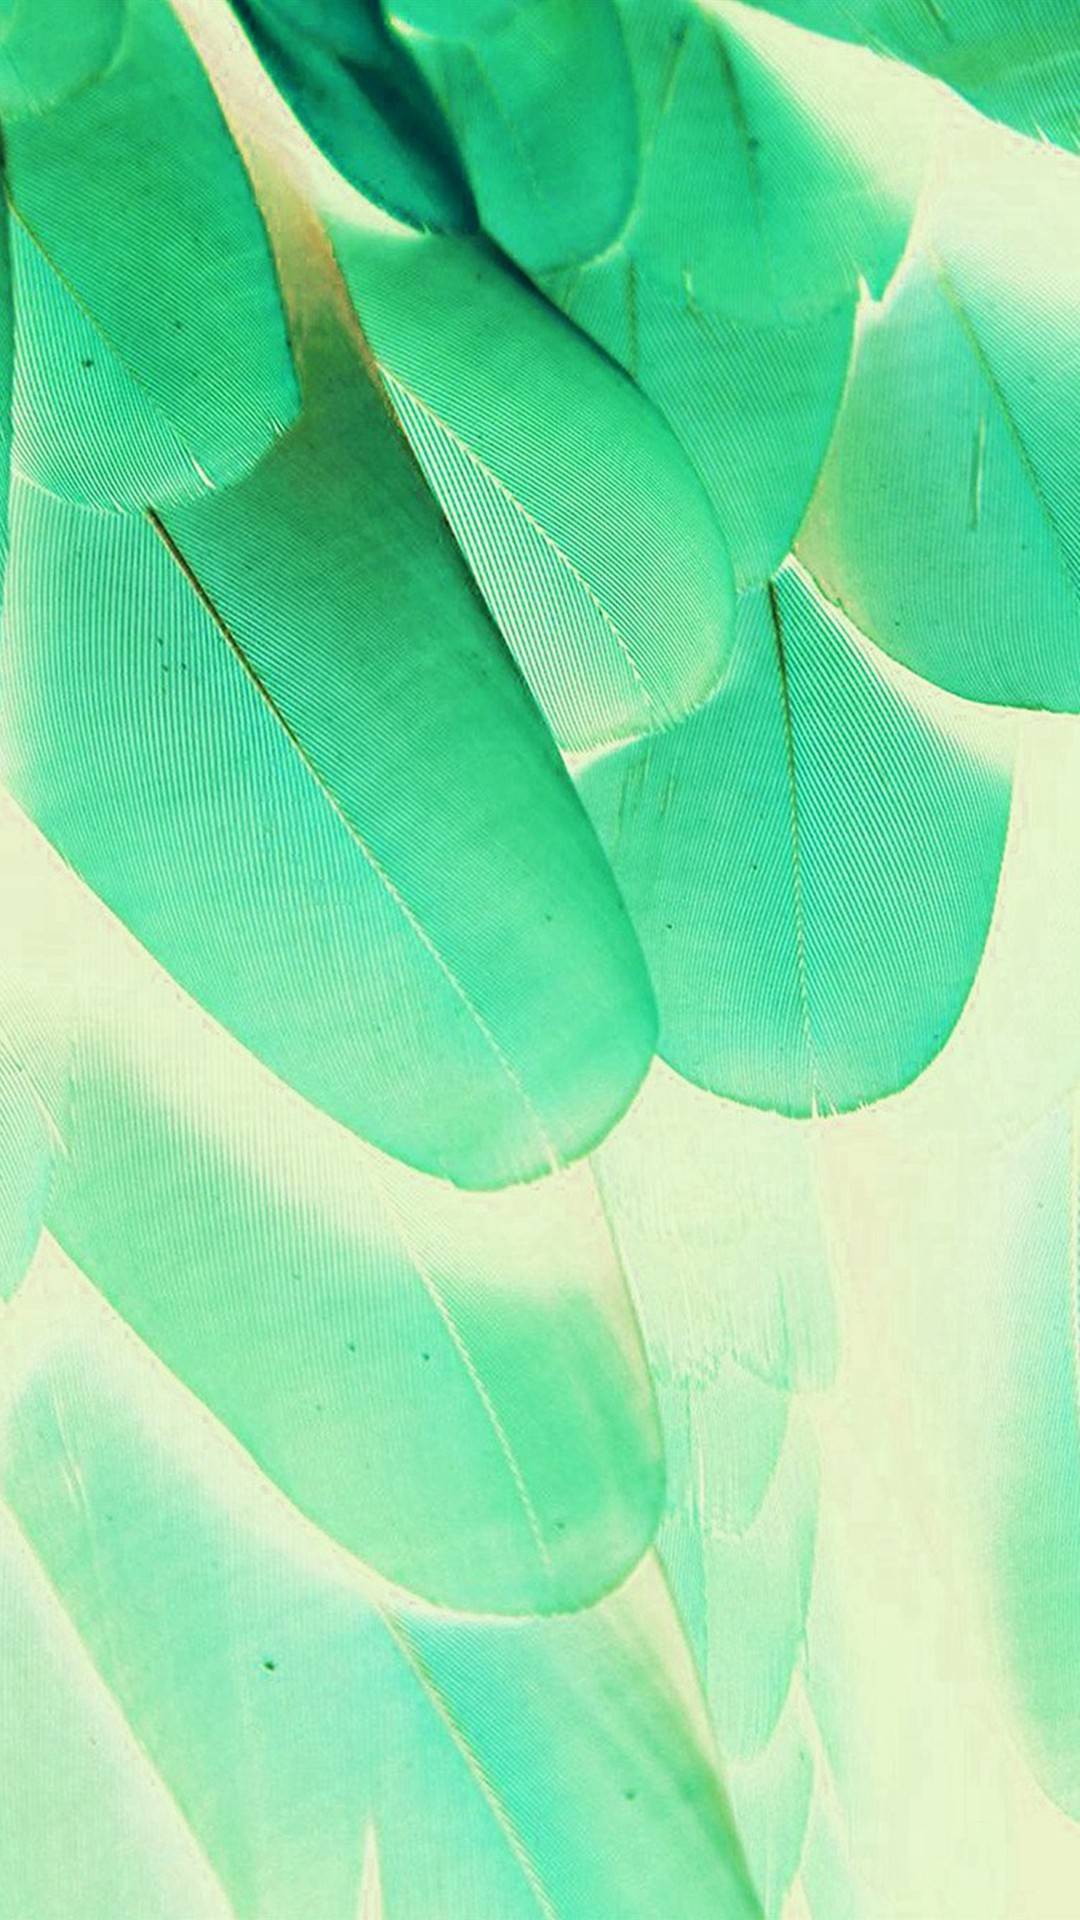 1080x1920 Feather Green Blue Nature Texture Animal Pattern iPhone 6 wallpaper